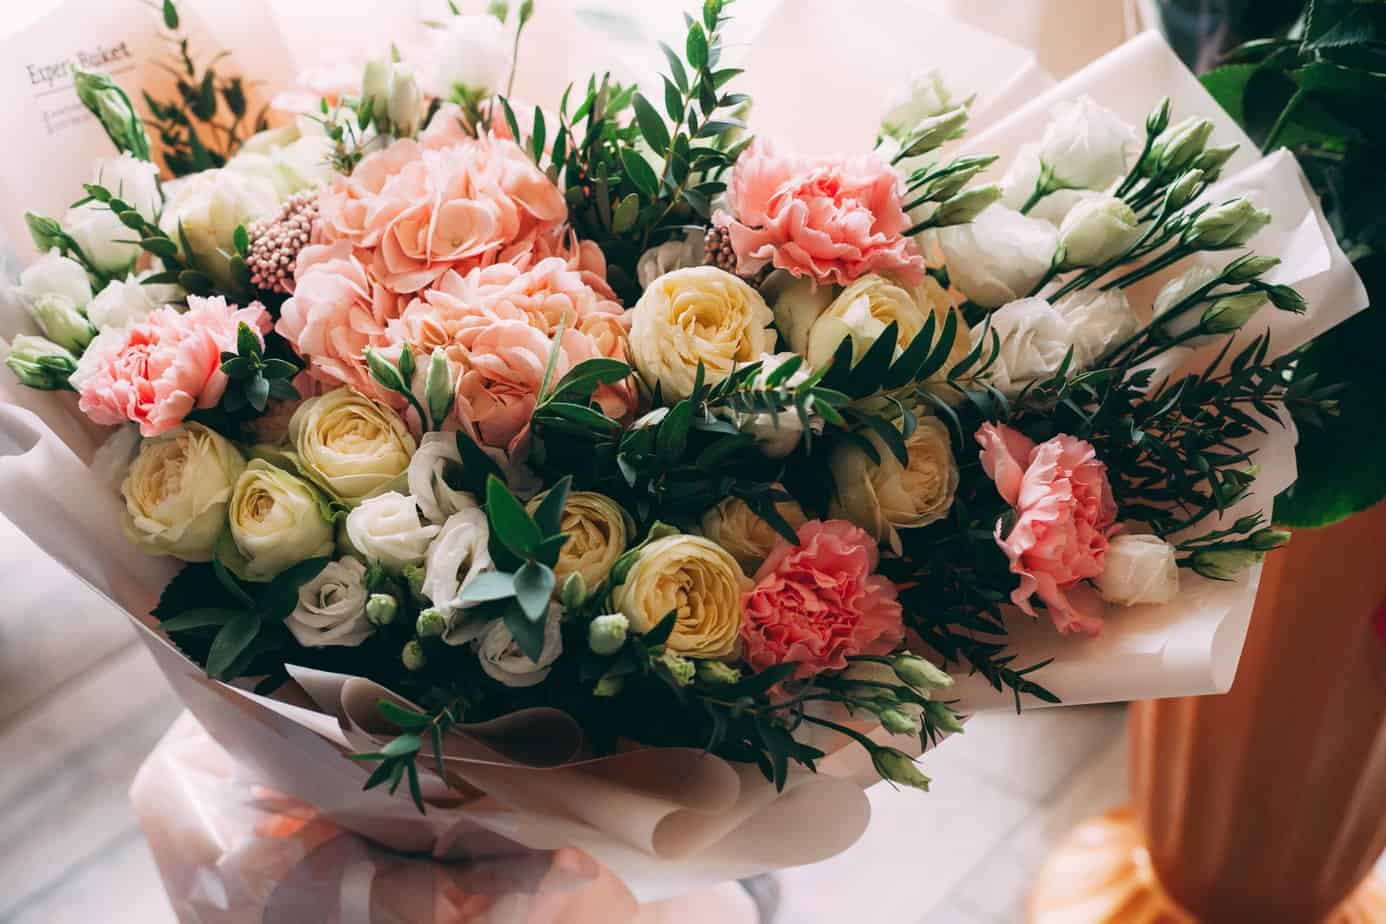 How to Choose the Perfect Flower Bouquet for Your Loved One?